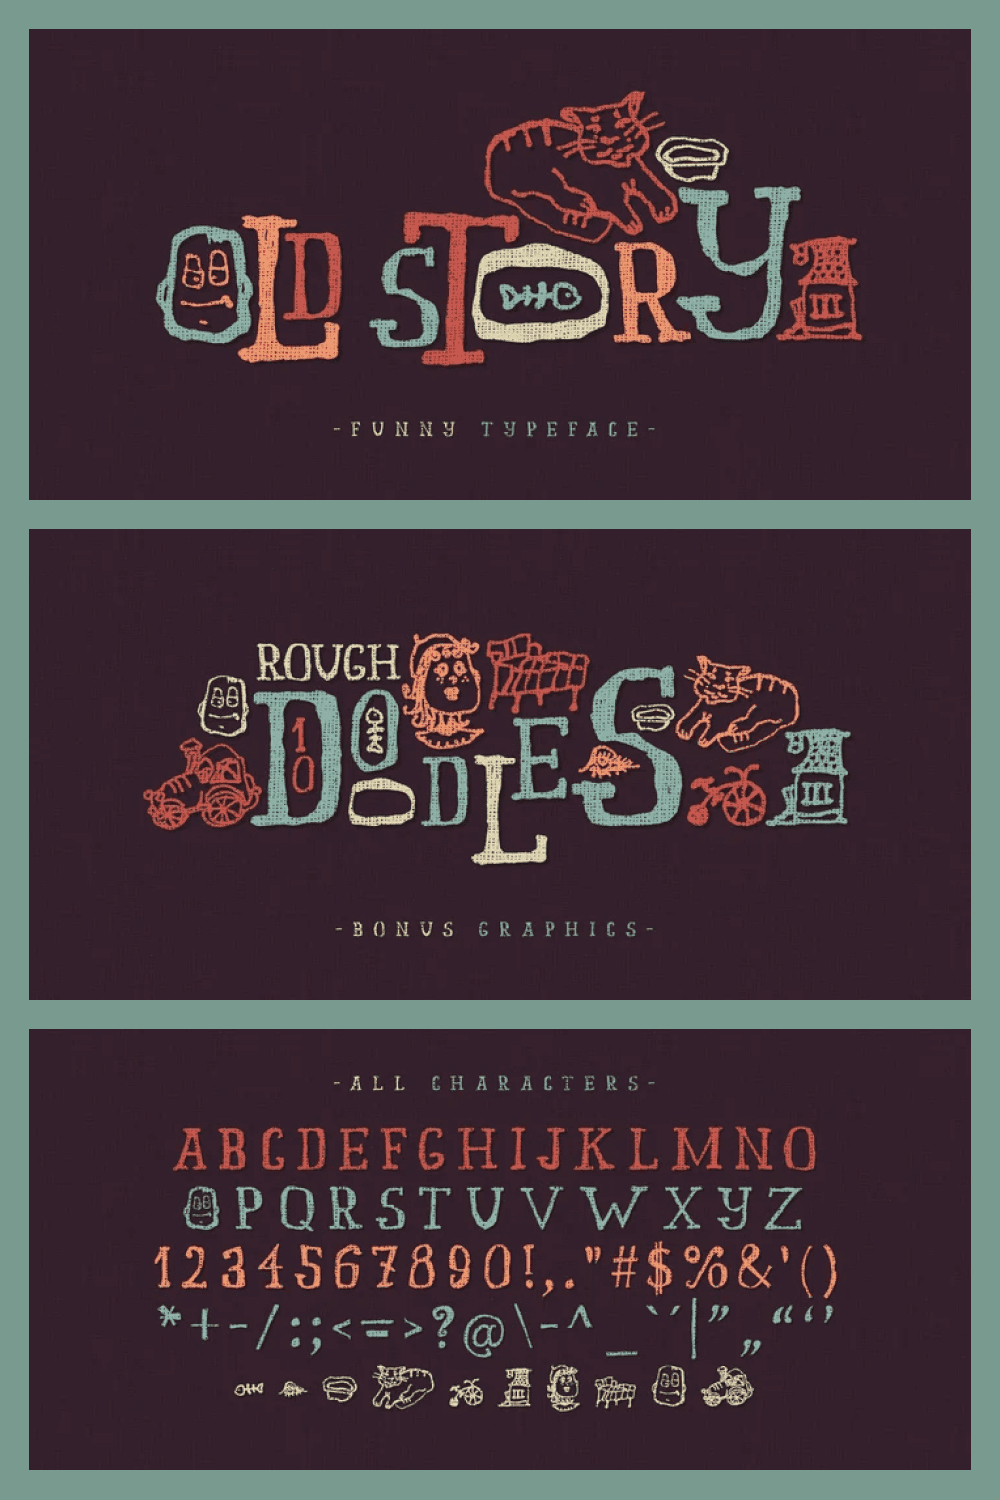 This font with funny doodles. All the graphics you can access from the